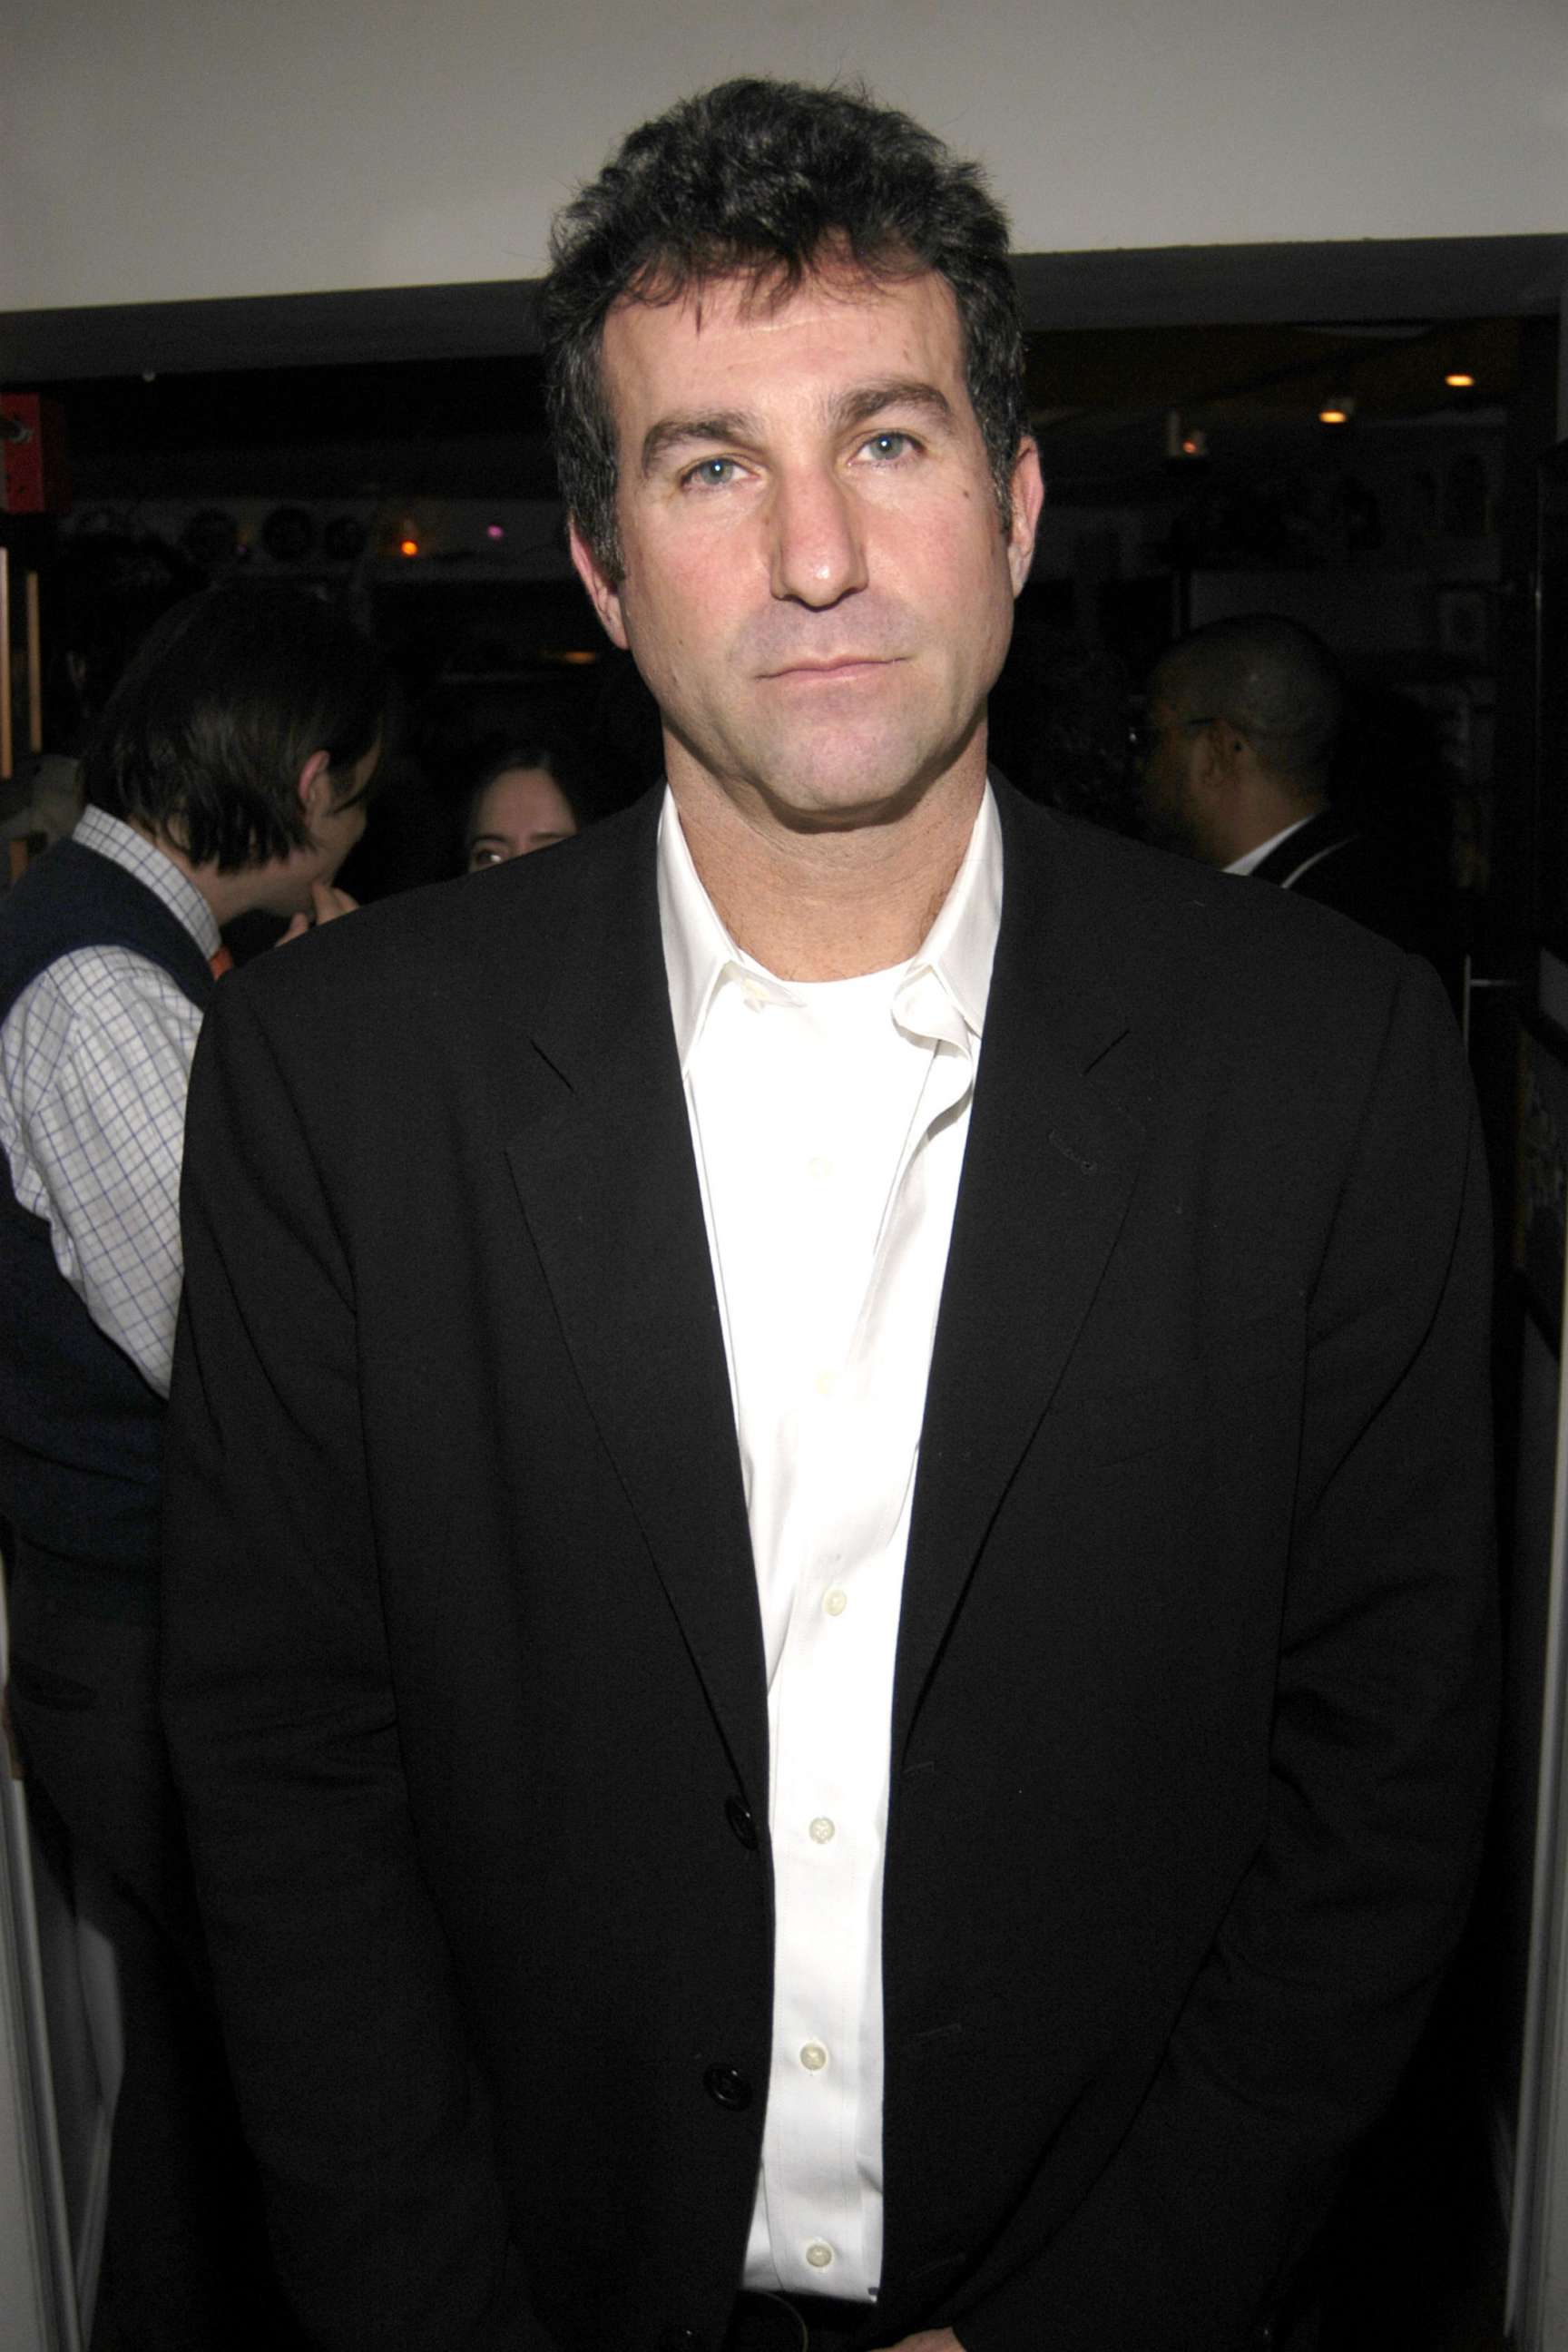 PHOTO: Ken Friedman attends New York Magazines 3rd Annual Oscar Viewing Party at The Spotted Pig, Feb. 24, 2008, in New York.